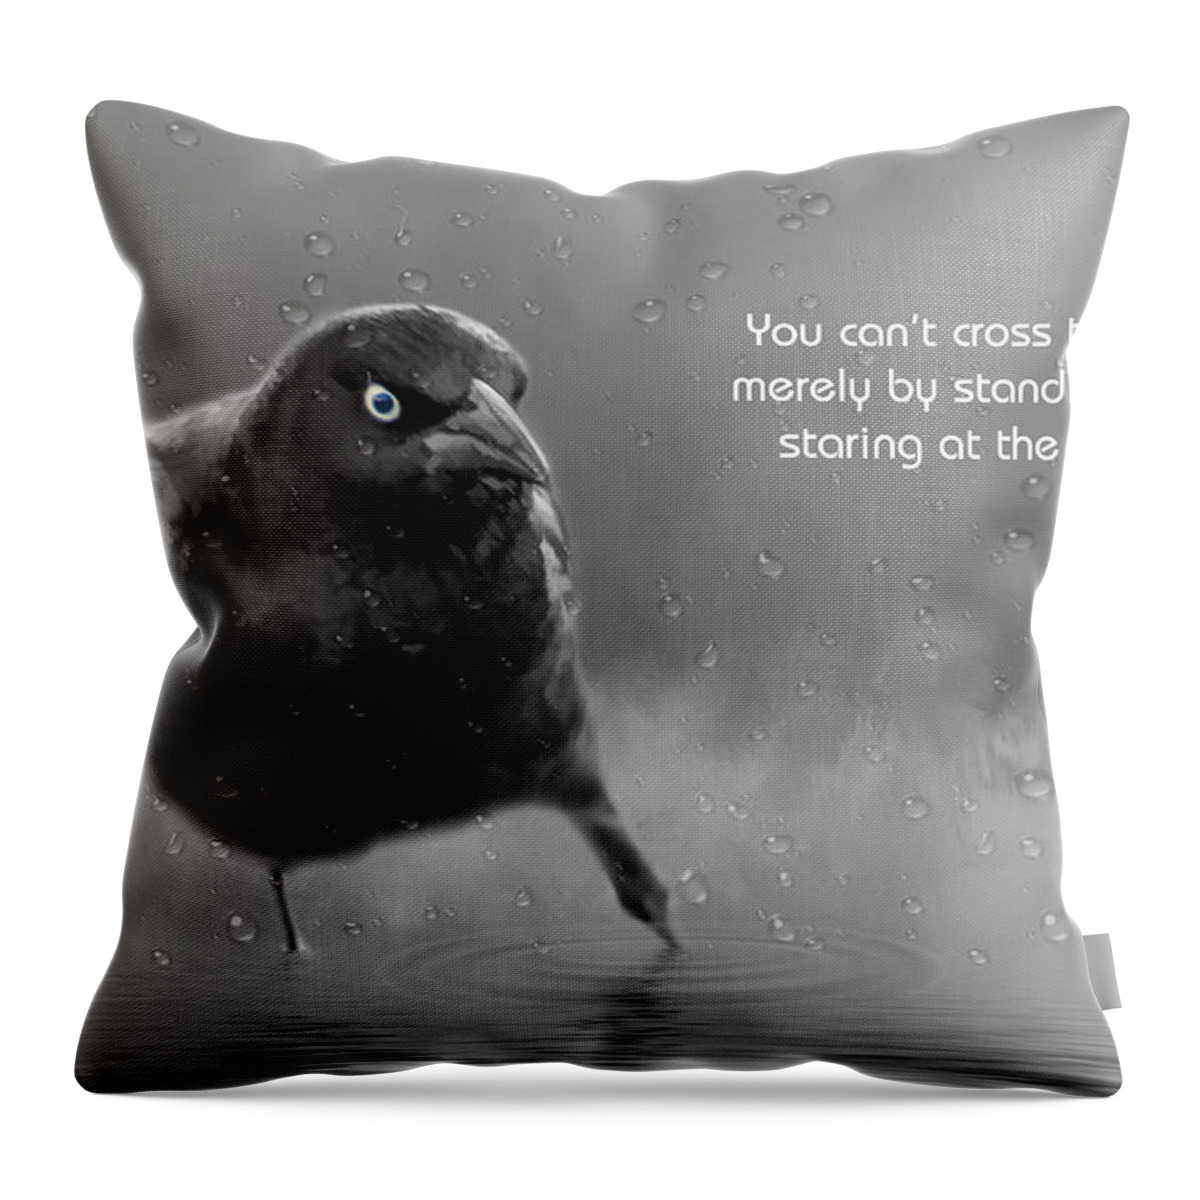 Motivational Throw Pillow featuring the photograph Crossing #2 by Cathy Kovarik